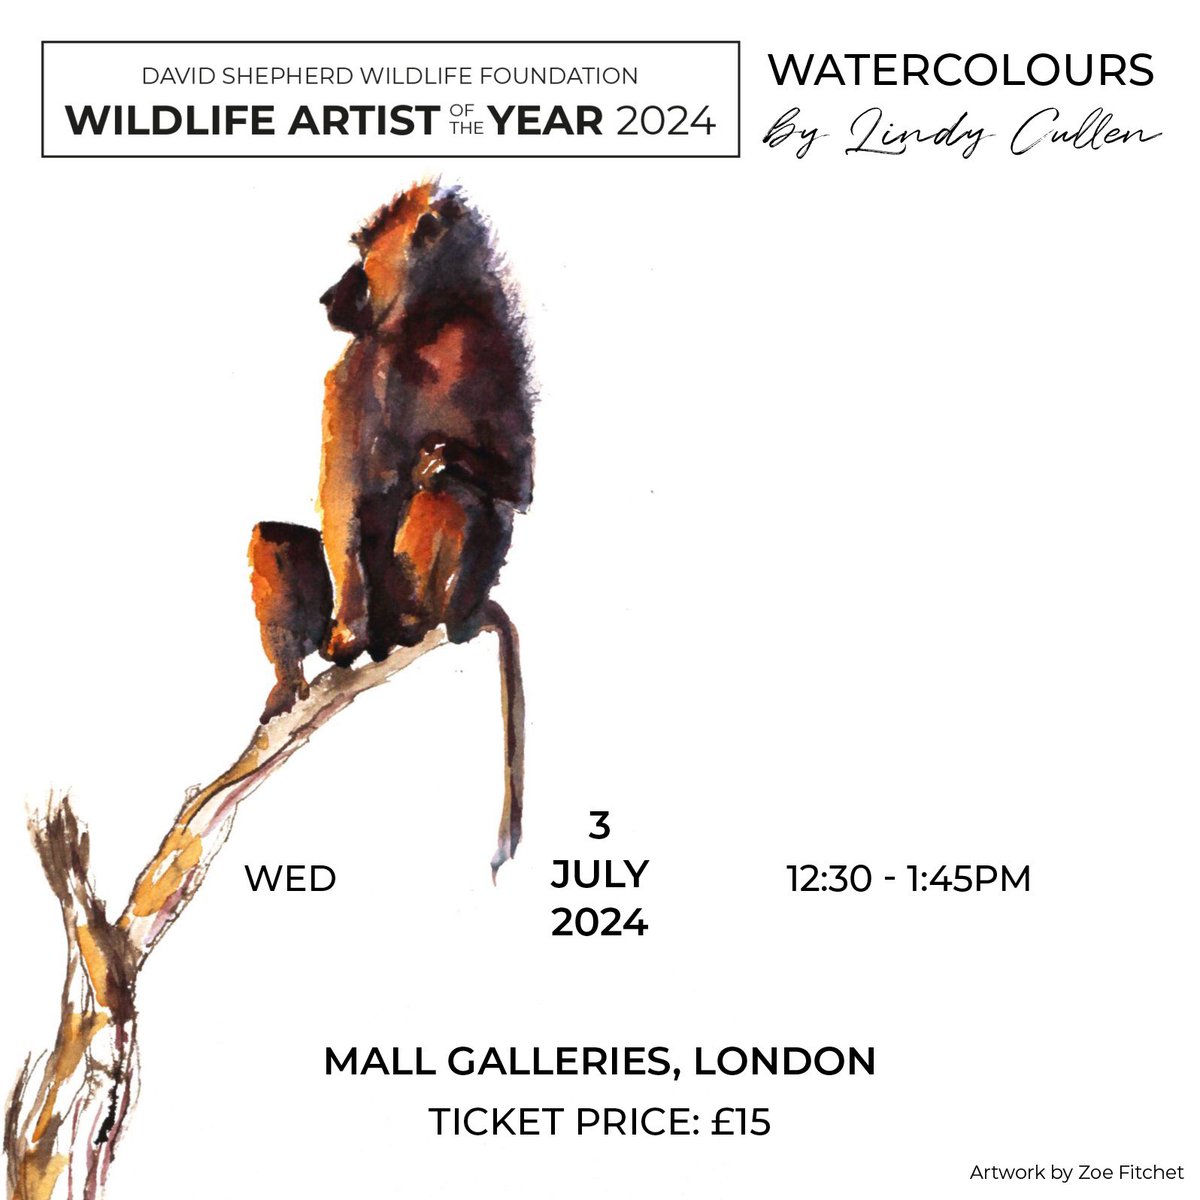 Get stuck in at the #WAY24 exhibition! 🎨   

We're delighted to announce three exciting workshops which will take place during our Wildlife Artist of the Year 2024 exhibition in July at the Mall Galleries.   

Find out more at davidshepherd.org/news-events-in…